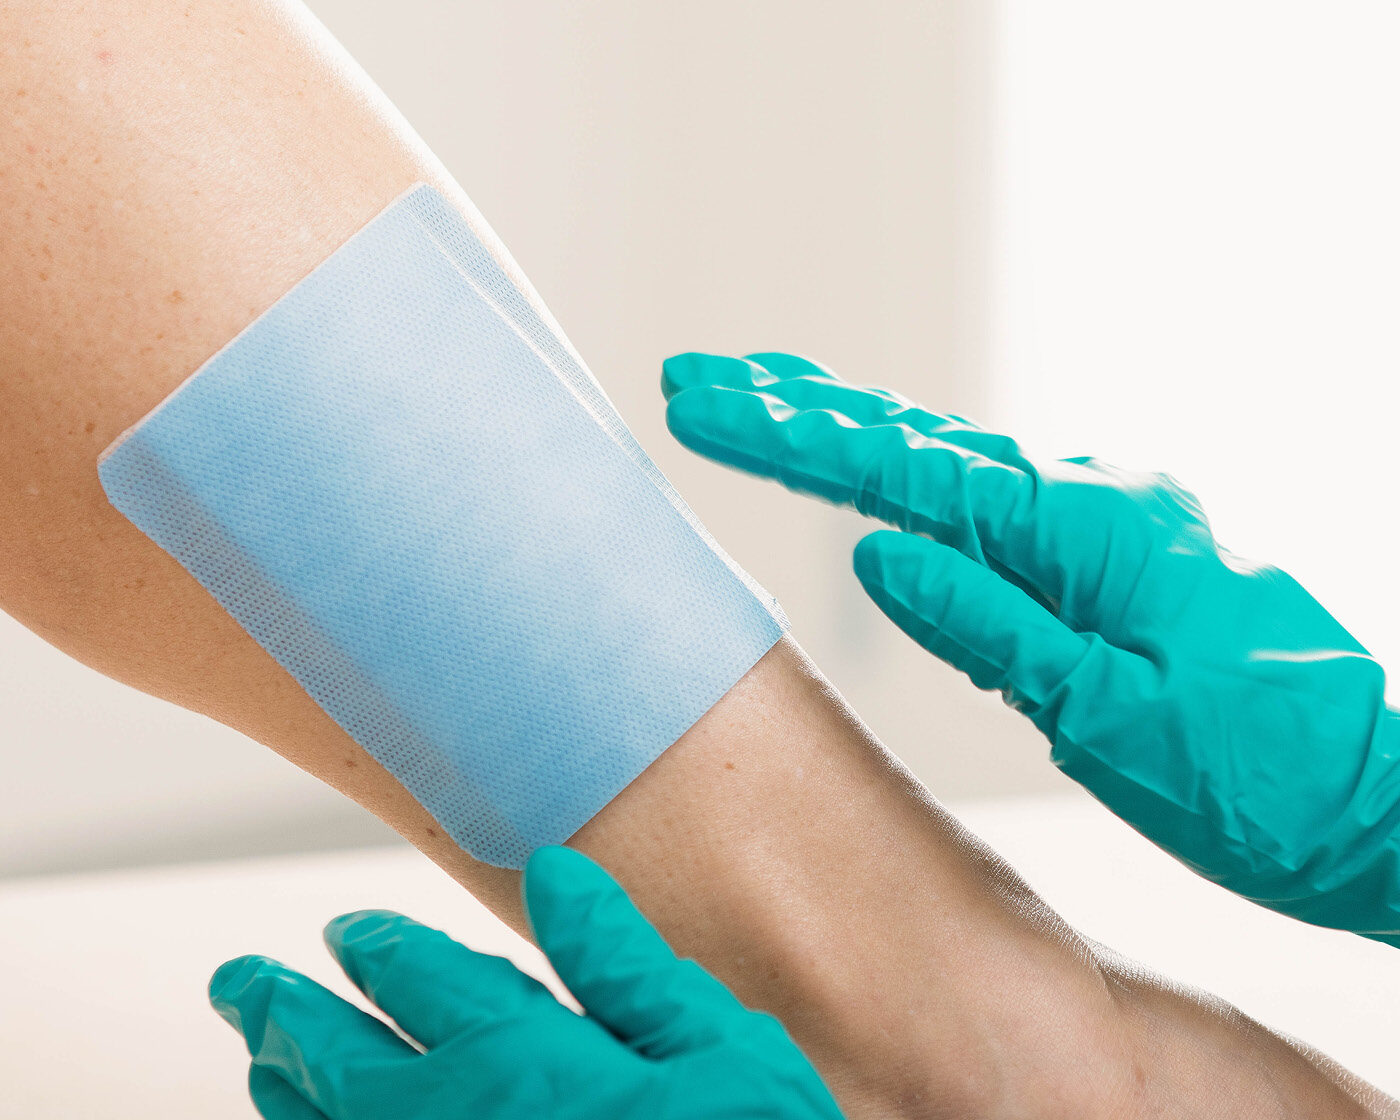 DryMax Foam, a superabsorbent wound dressing from Absorbest